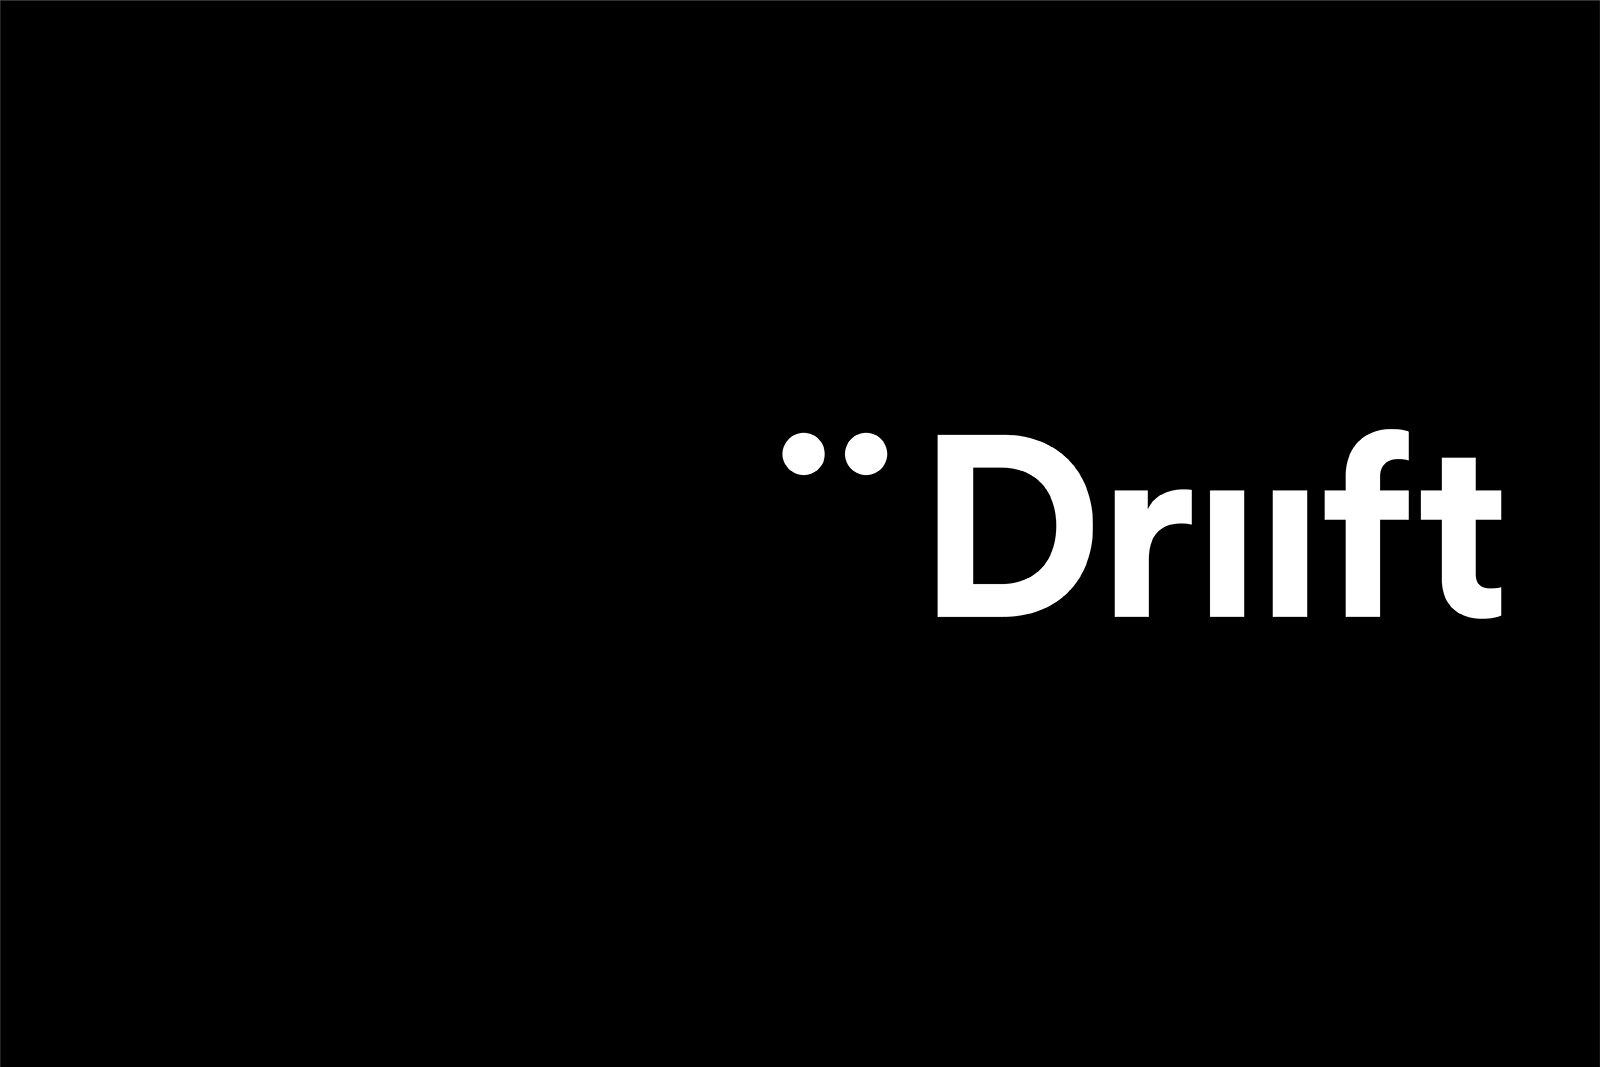 Logo Design and brand identity for Driift by O Street - Scottish design agency.